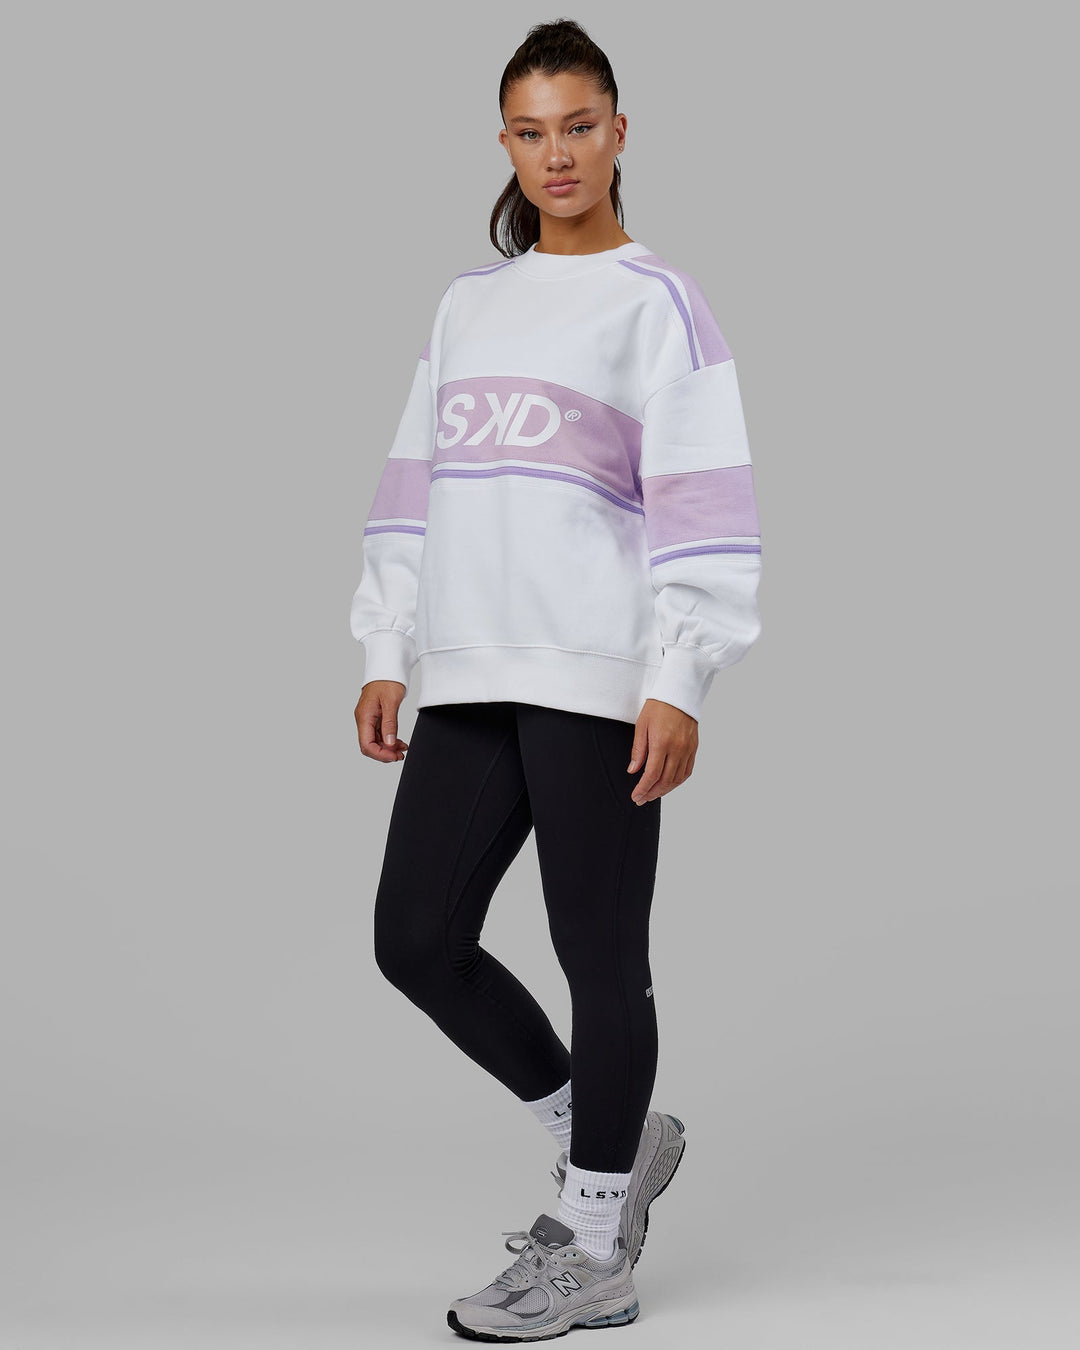 Unisex A-Team Sweater Oversize - White-Pale Lilac